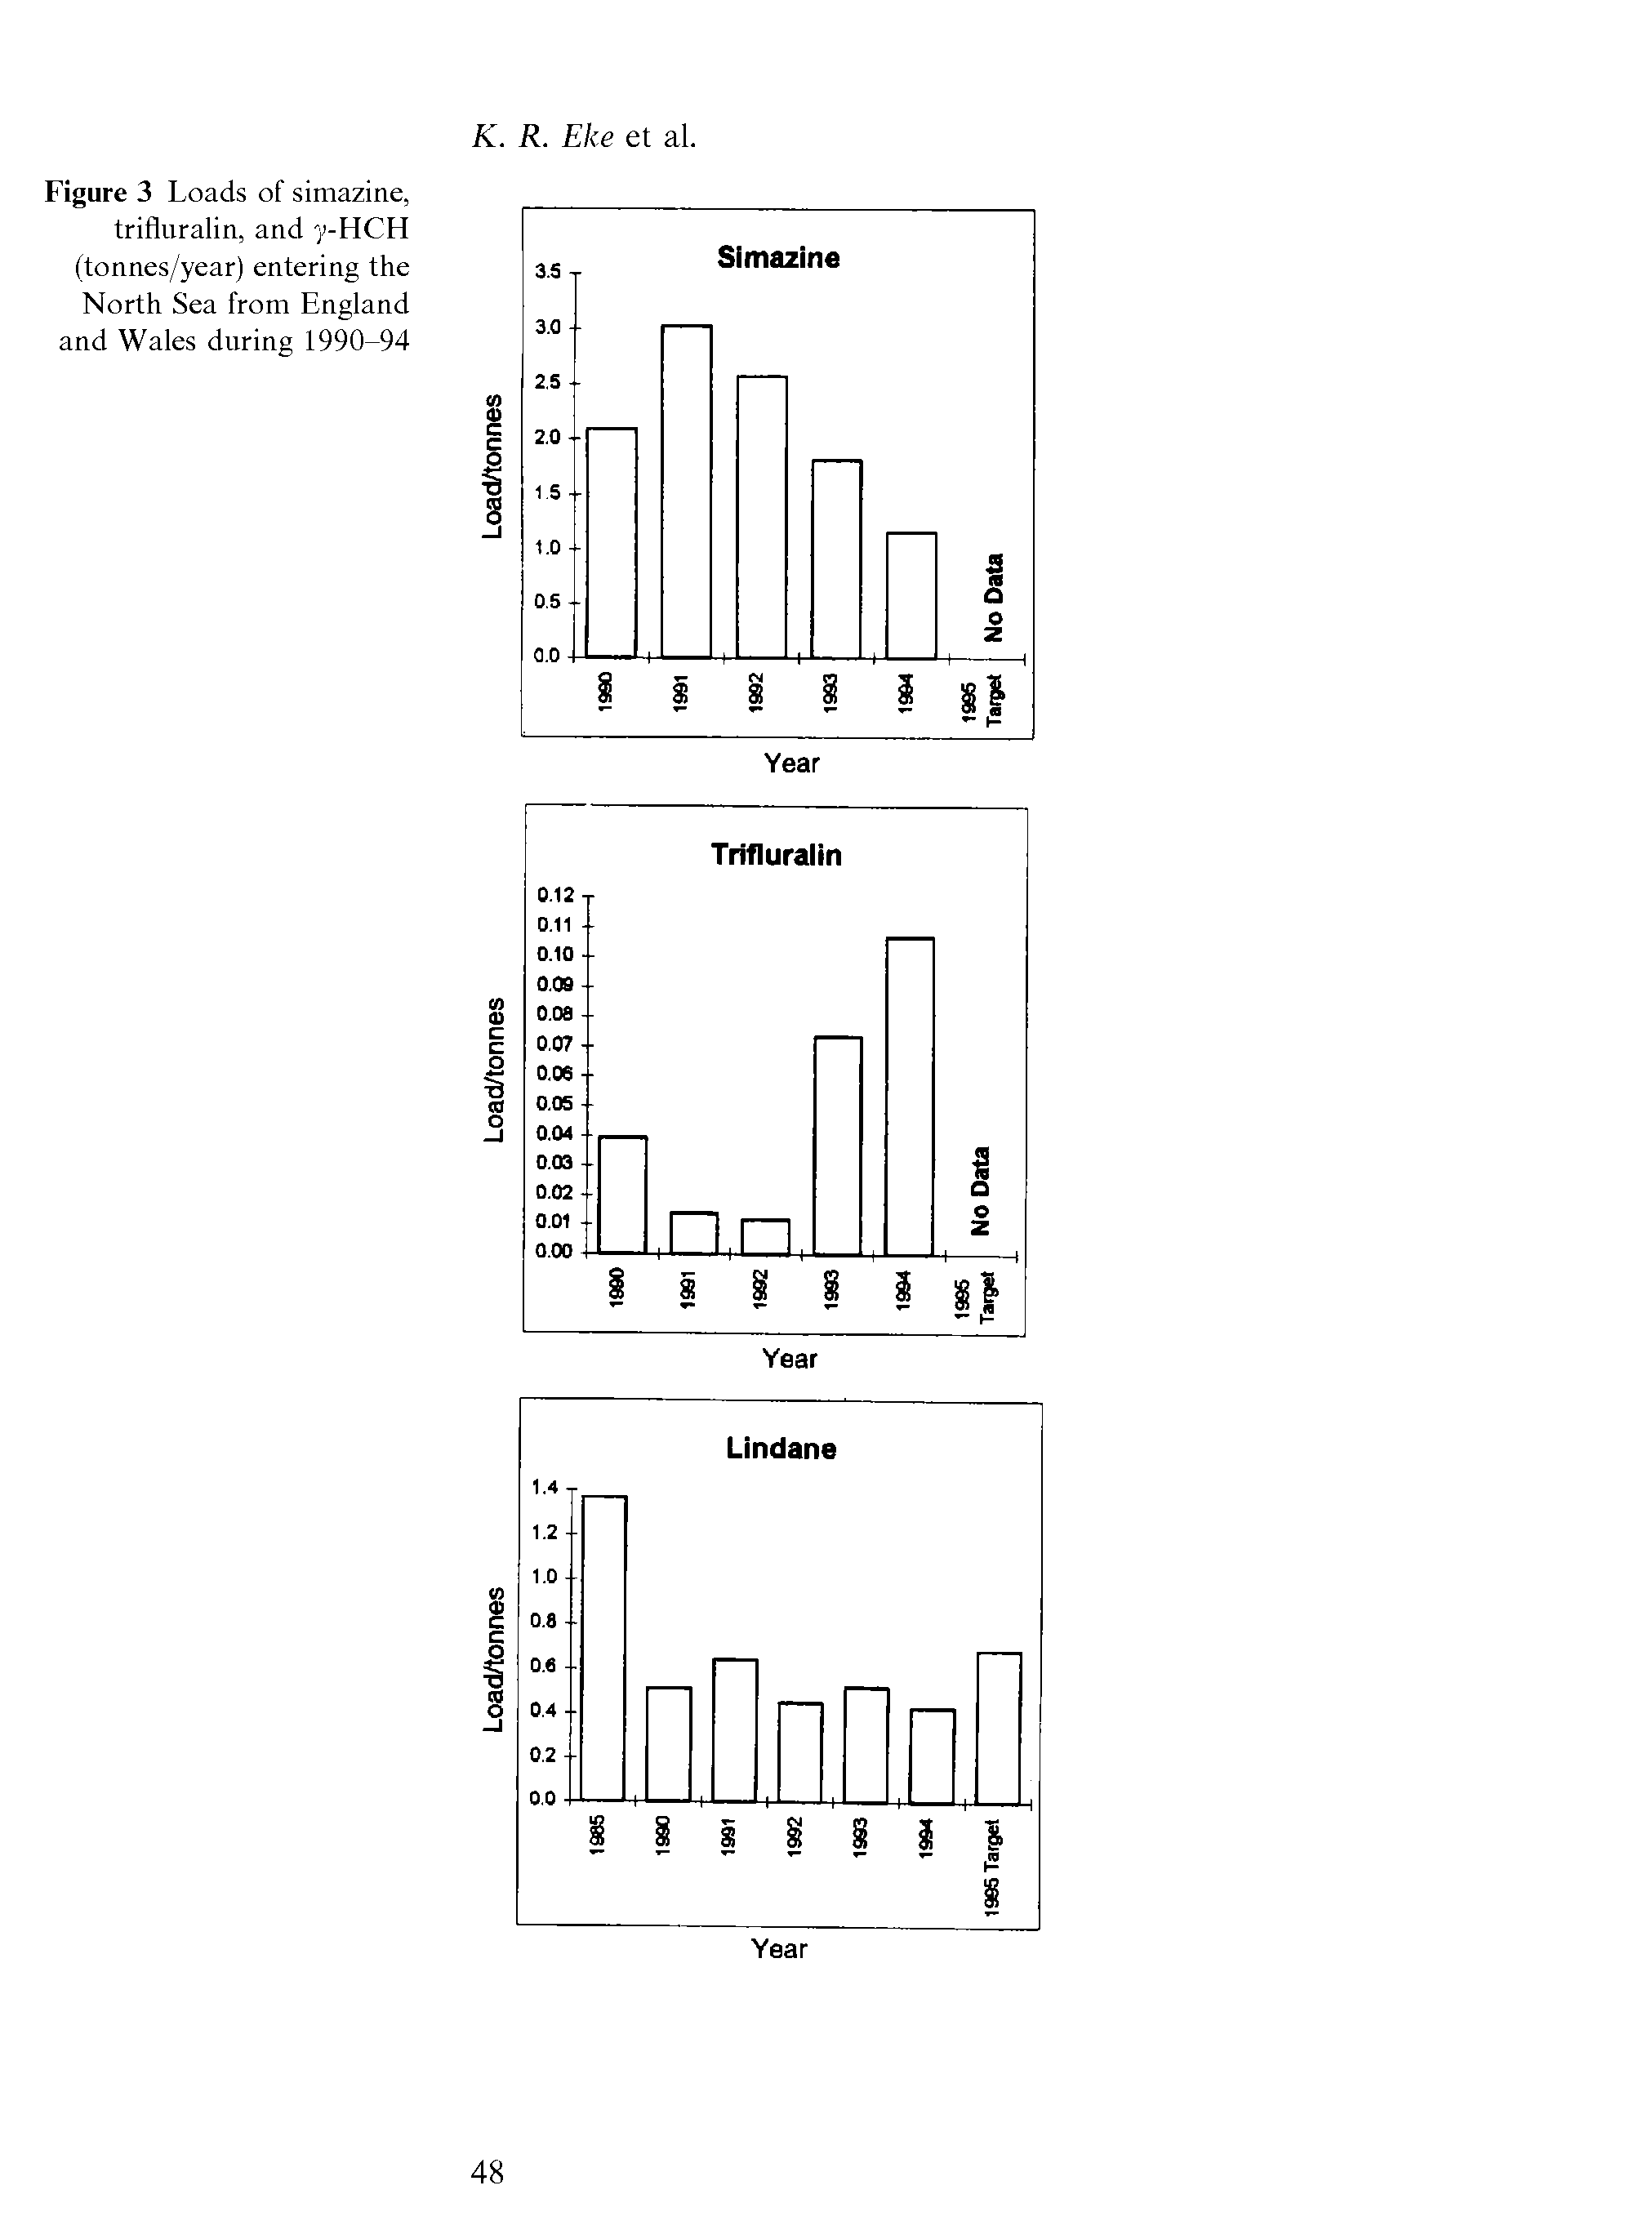 Figure 3 Loads of simazine, trifluralin, and j -HCH (tonnes/year) entering the North Sea from England and Wales during 1990-94...